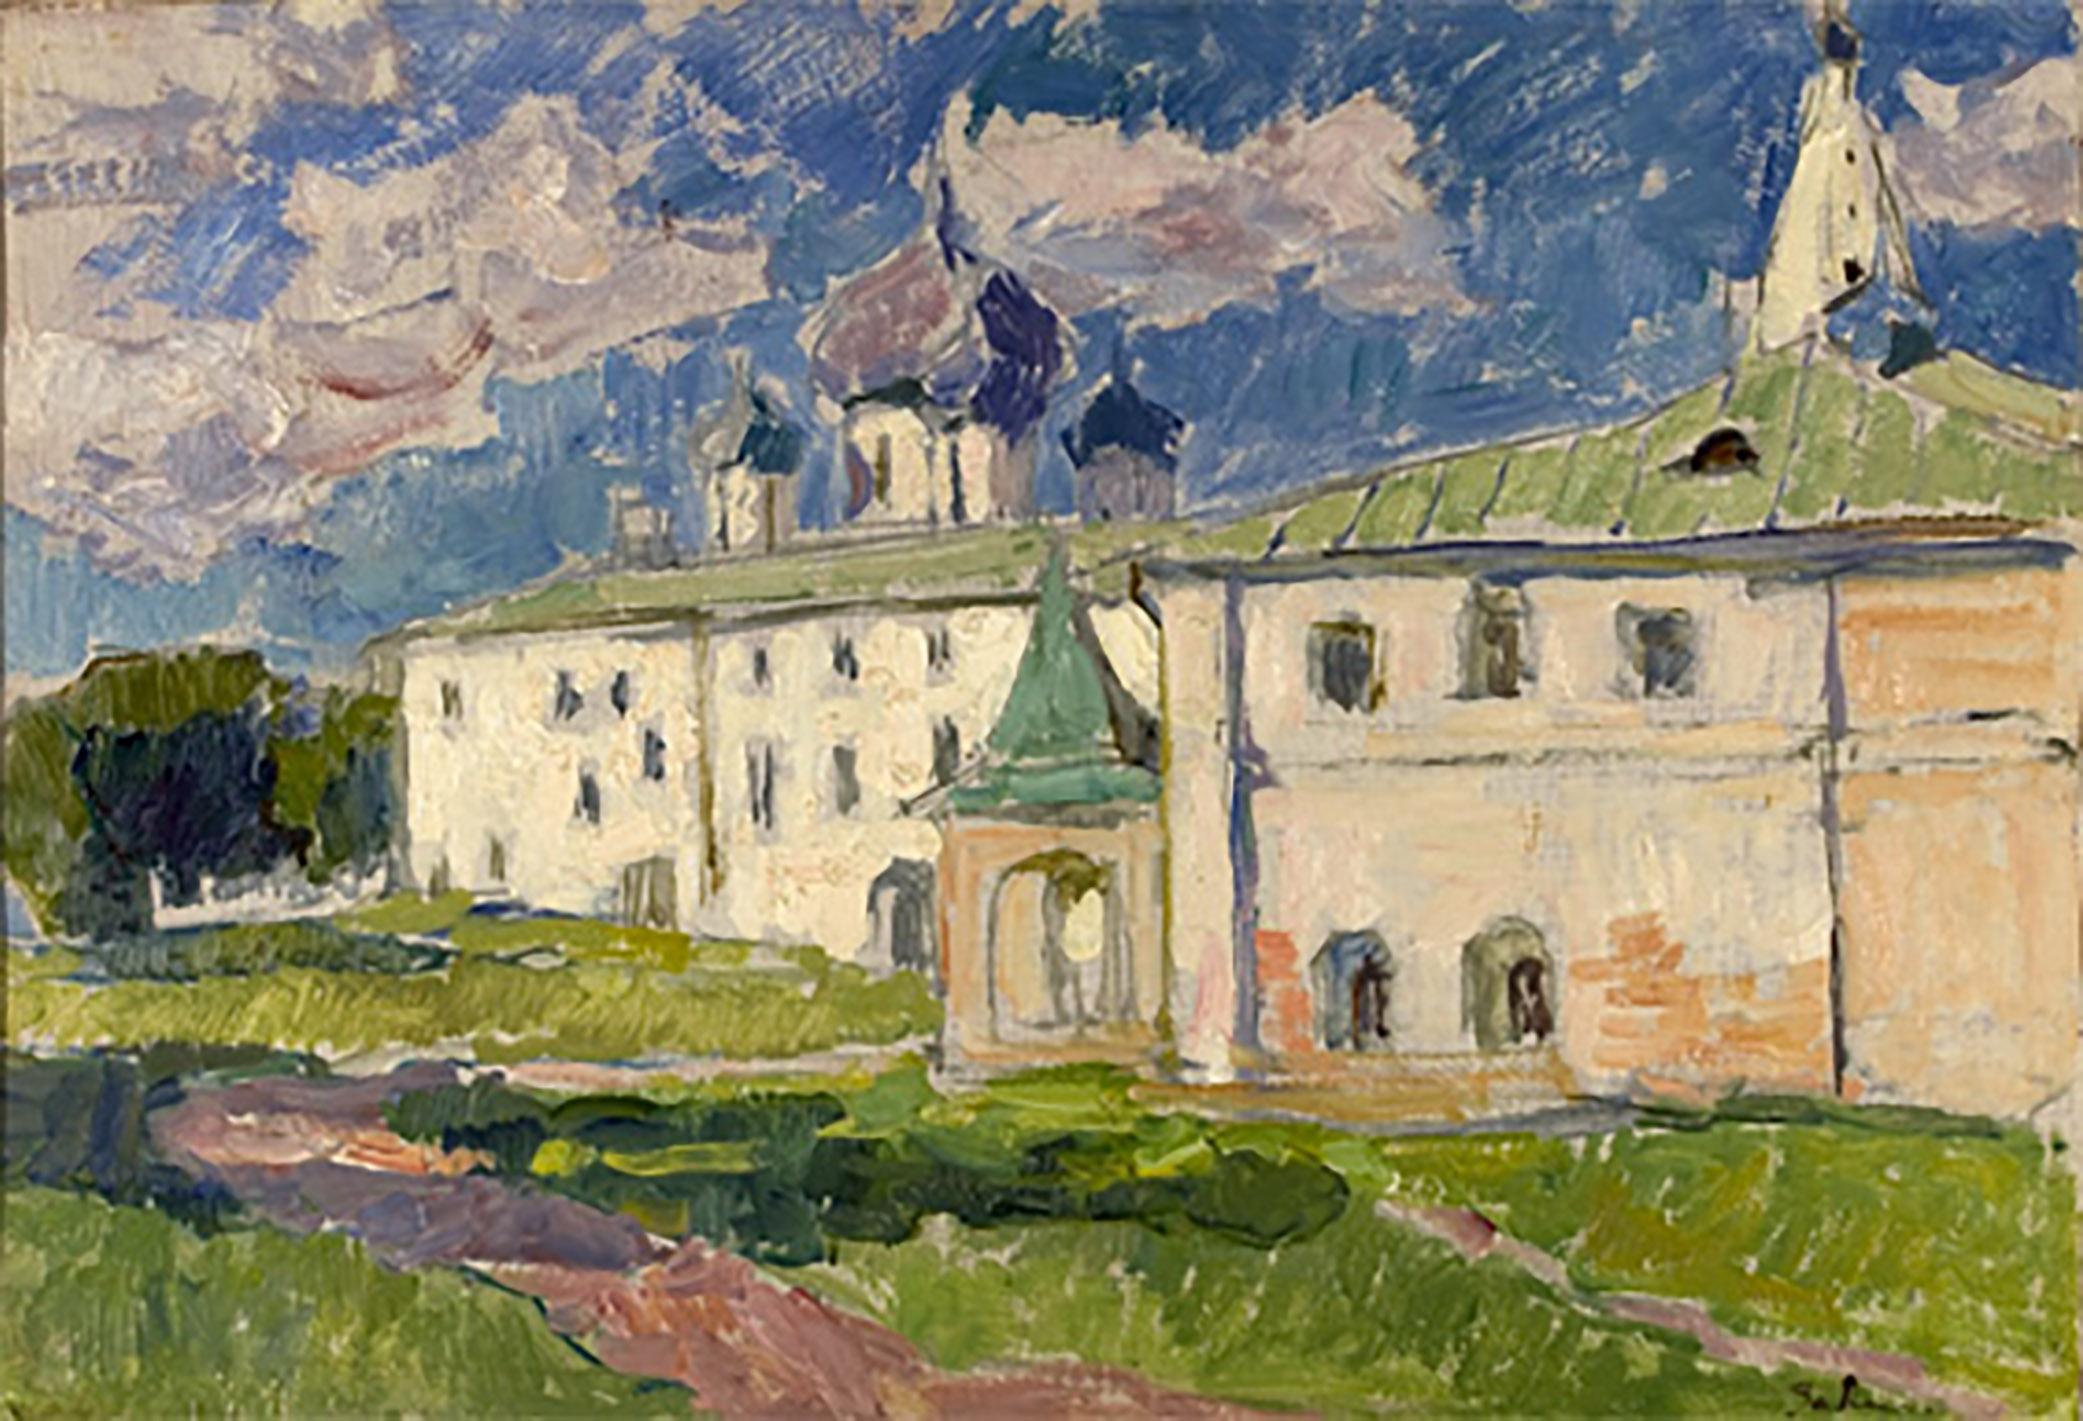 Vyacheslav Zabelin (1935- 2001) Considered a living master during his lifetime in Moscow, painted Suzdal in 1964. Zabelin had already 300 paintings in museum collections throughout the world at the time of his death. A Surikov professor and an